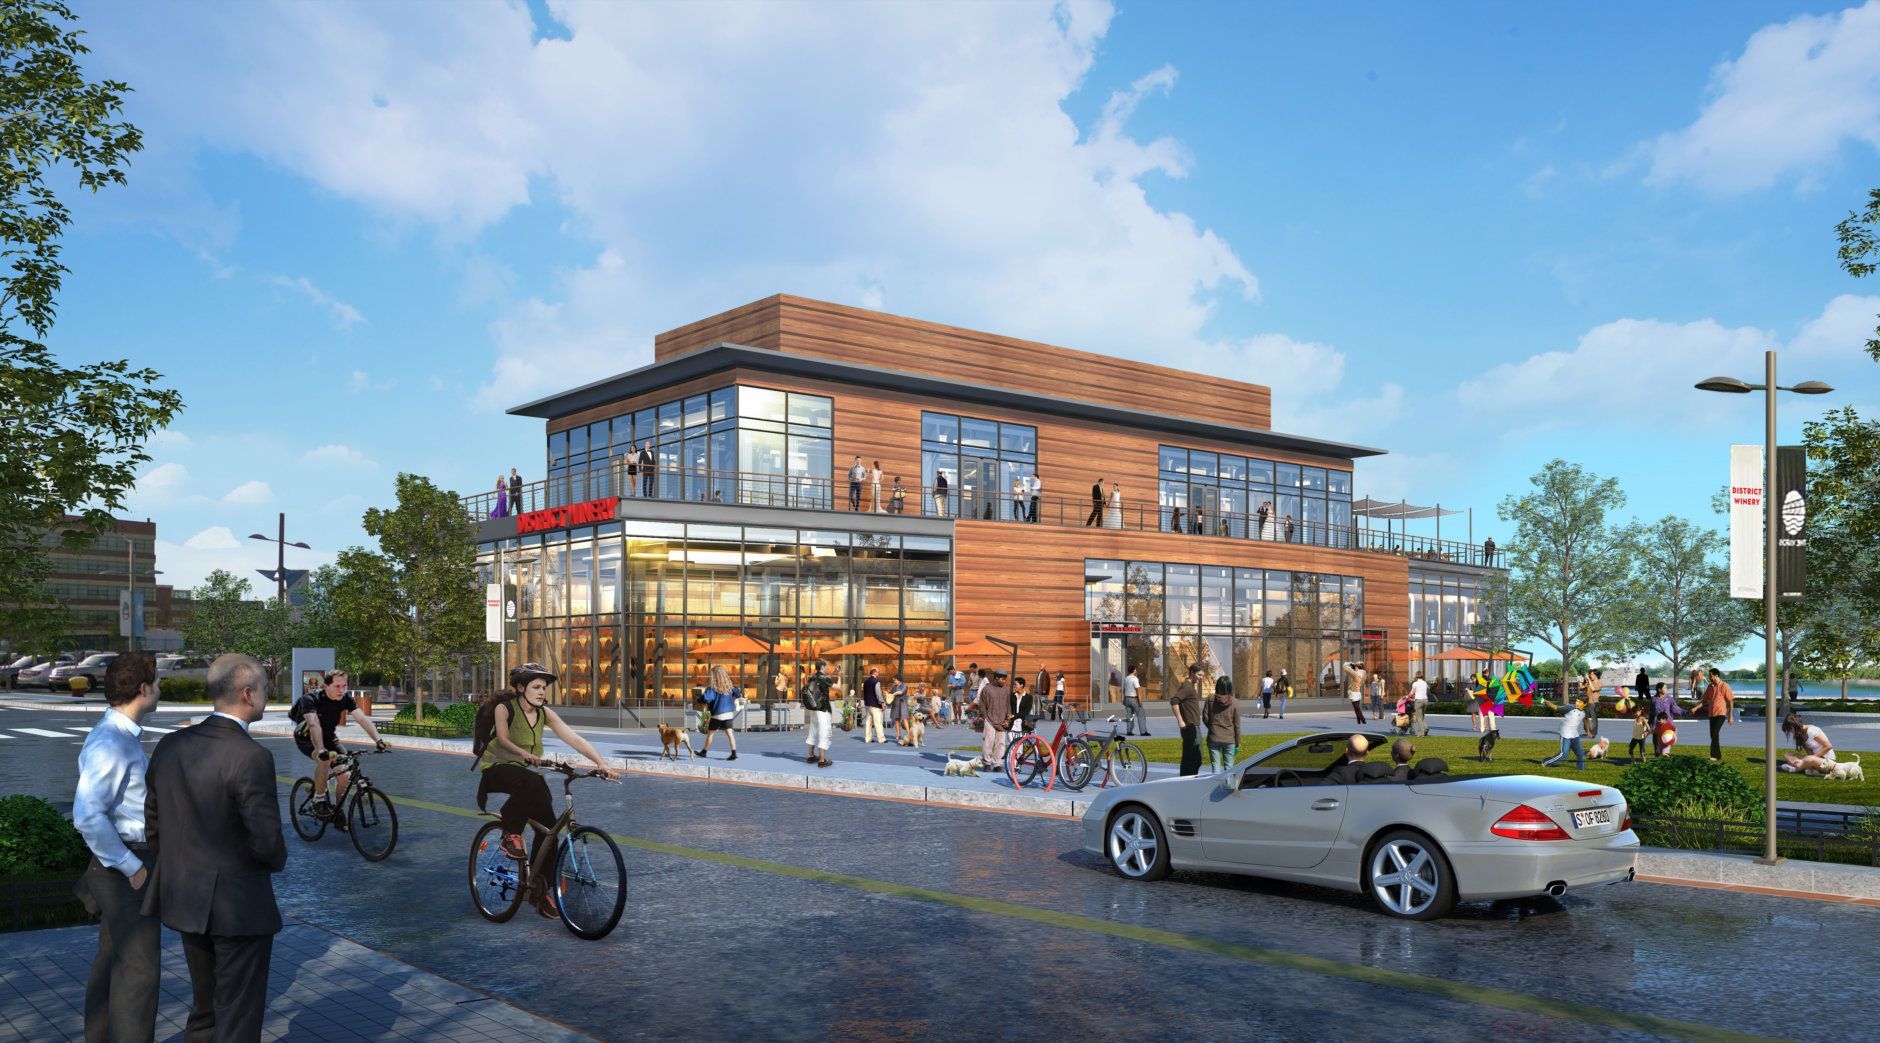 Phase 1 development repurposed some of D.C.'s oldest and historically significant buildings. (Courtesy The Brand Guild)